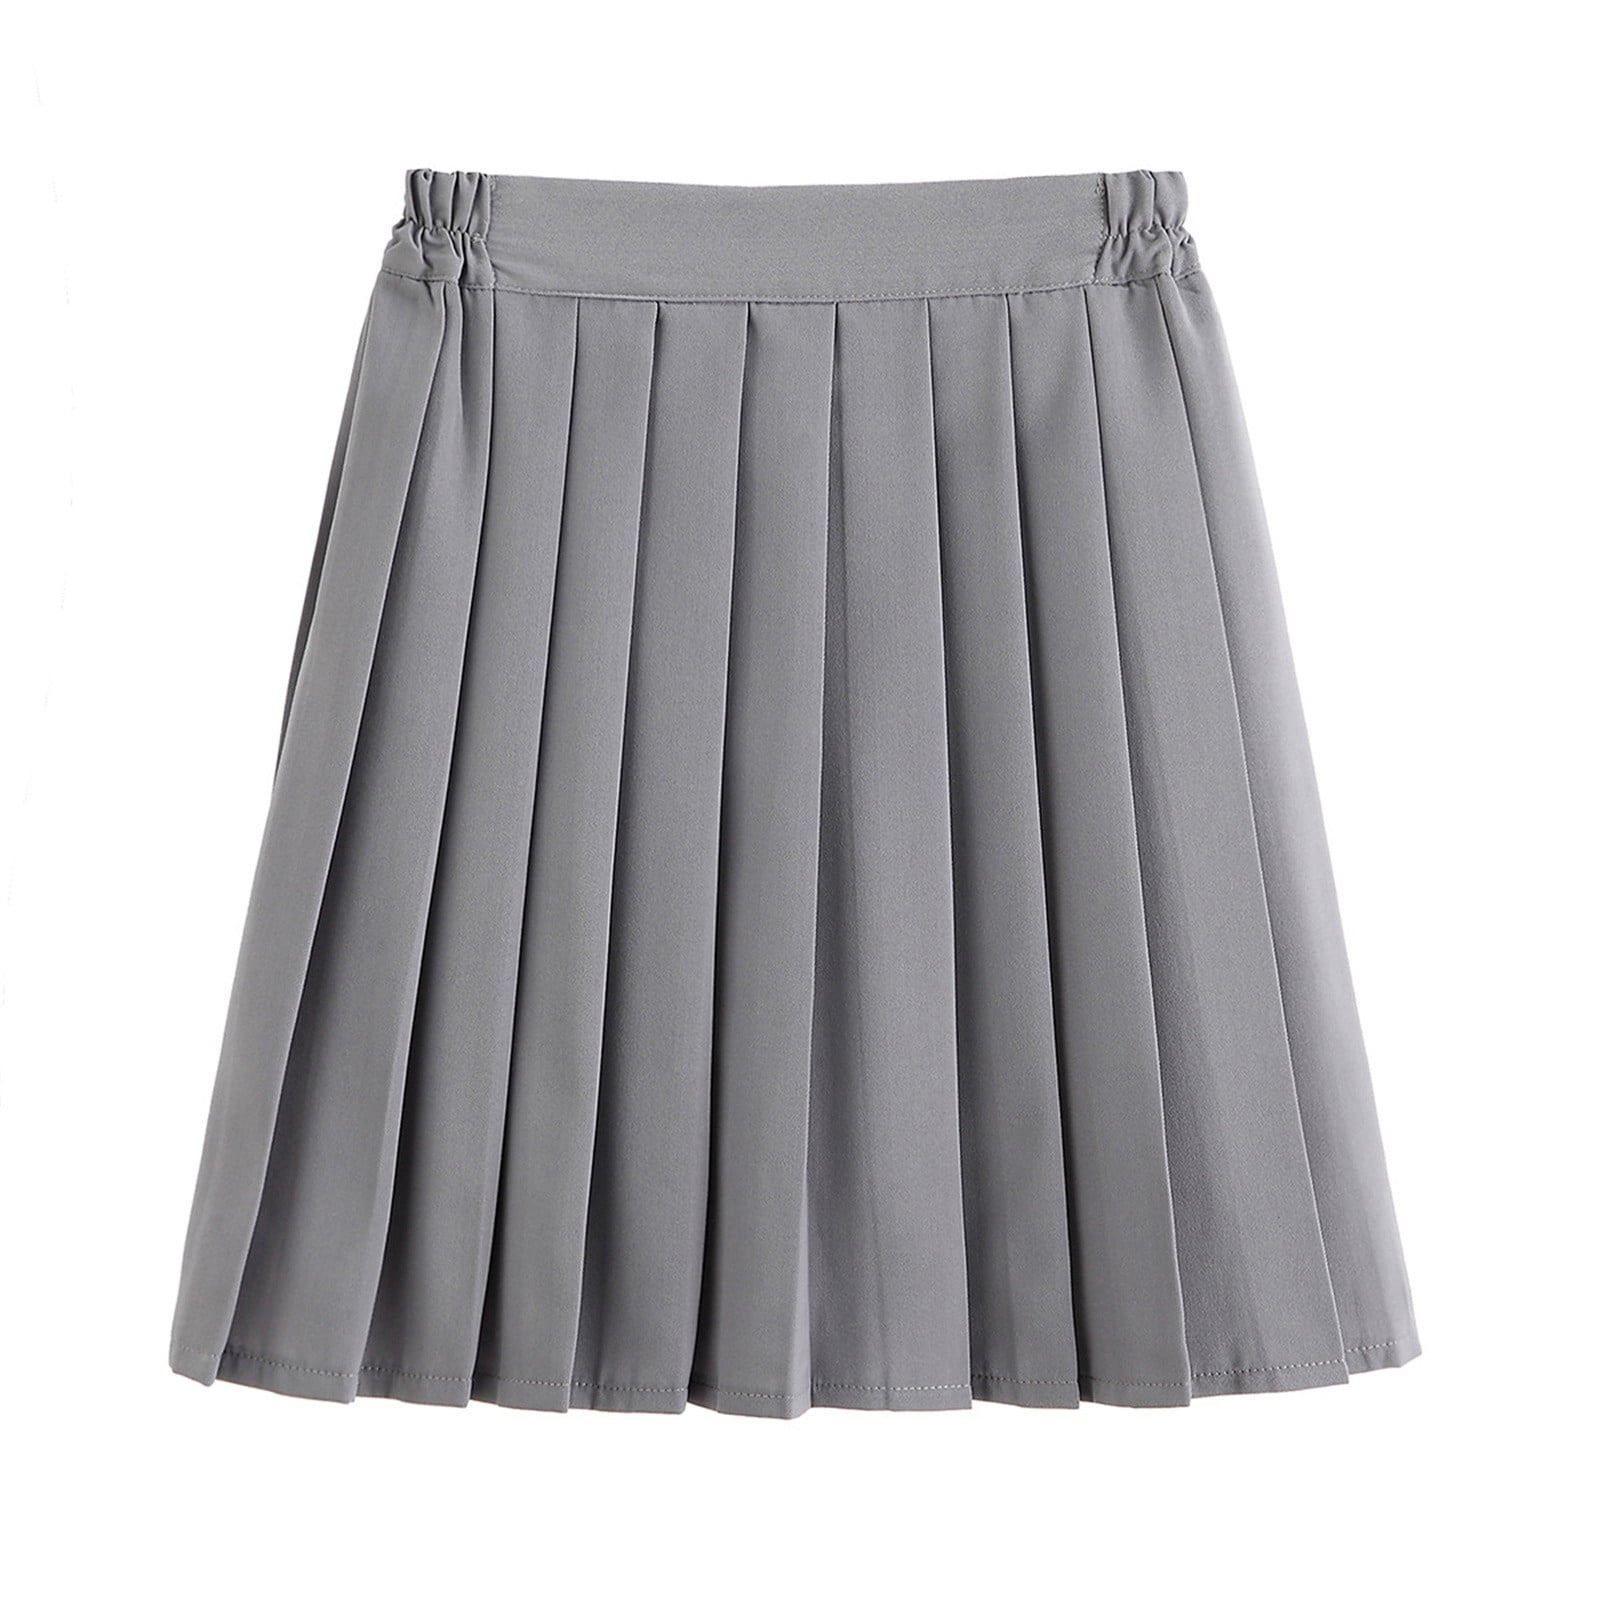 adviicd Quick Wrap Cover-up That Multitasks as The Perfect Travel Summer  Skirt work Skirts for Women office - Walmart.com